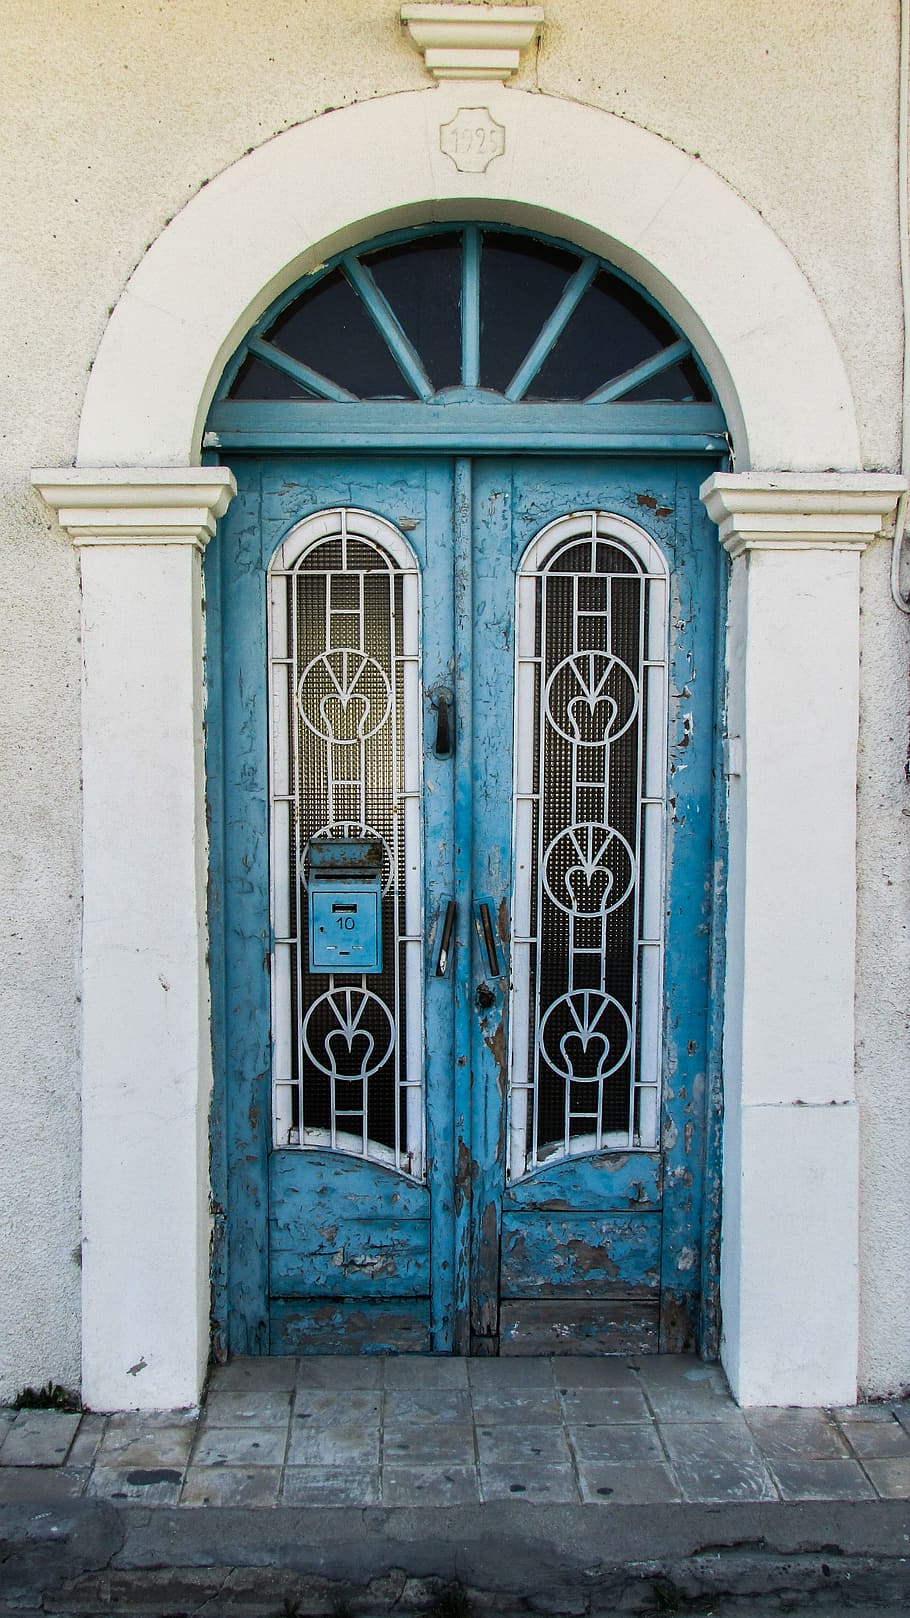 Cyprus, Larnaca, Town, Old House, entrance, neoclassic, architecture, door, old, window